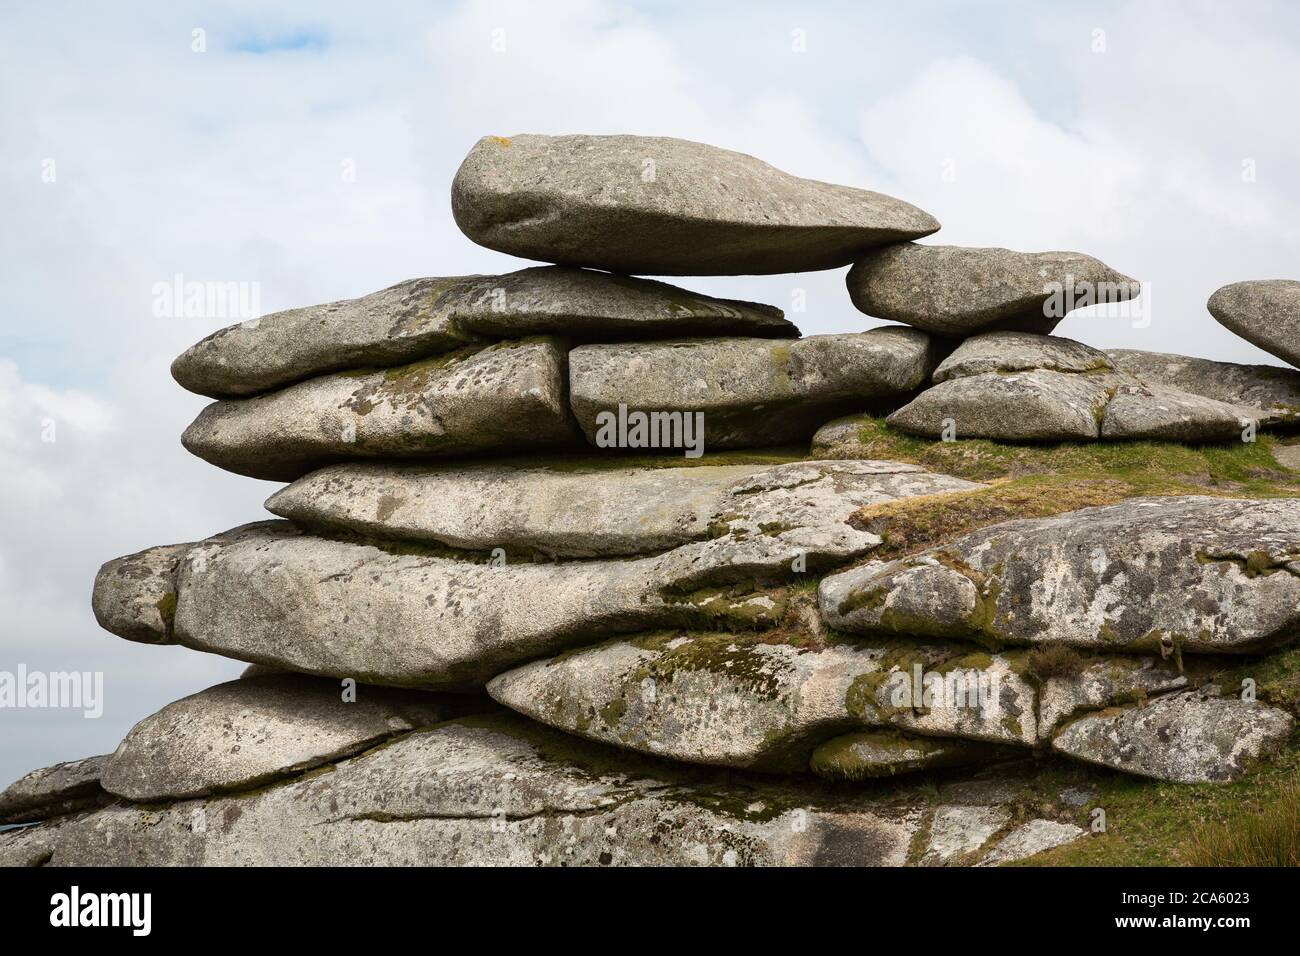 The Cheesewring stone cairns, a pile of large flat stones in Cornwall, UK Stock Photo